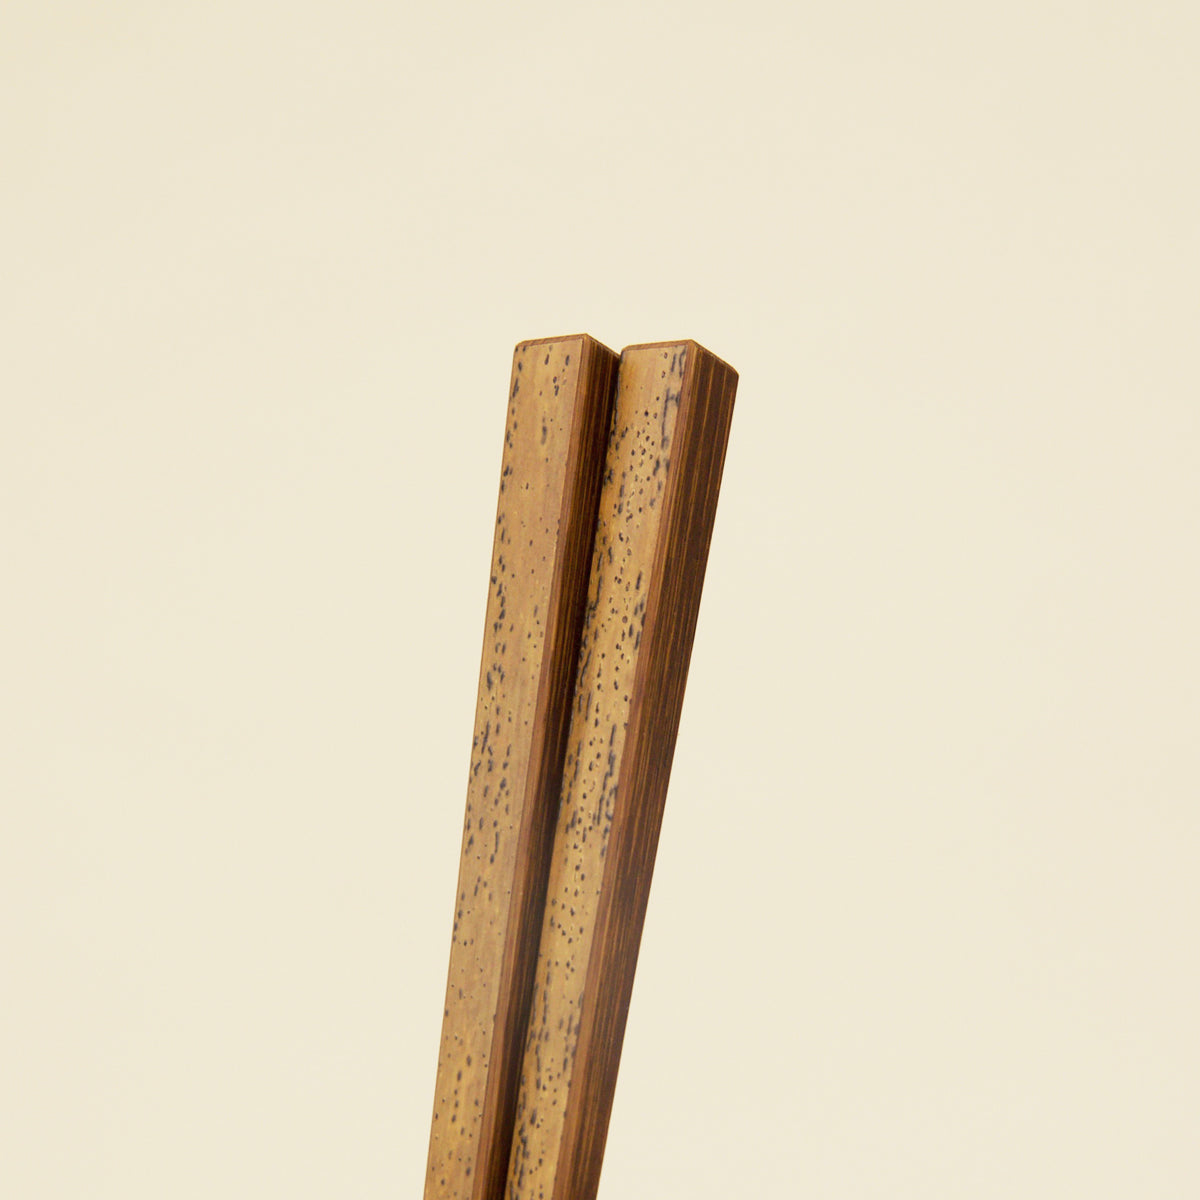 Lacquered Bamboo Chopsticks - Sesame Patterned